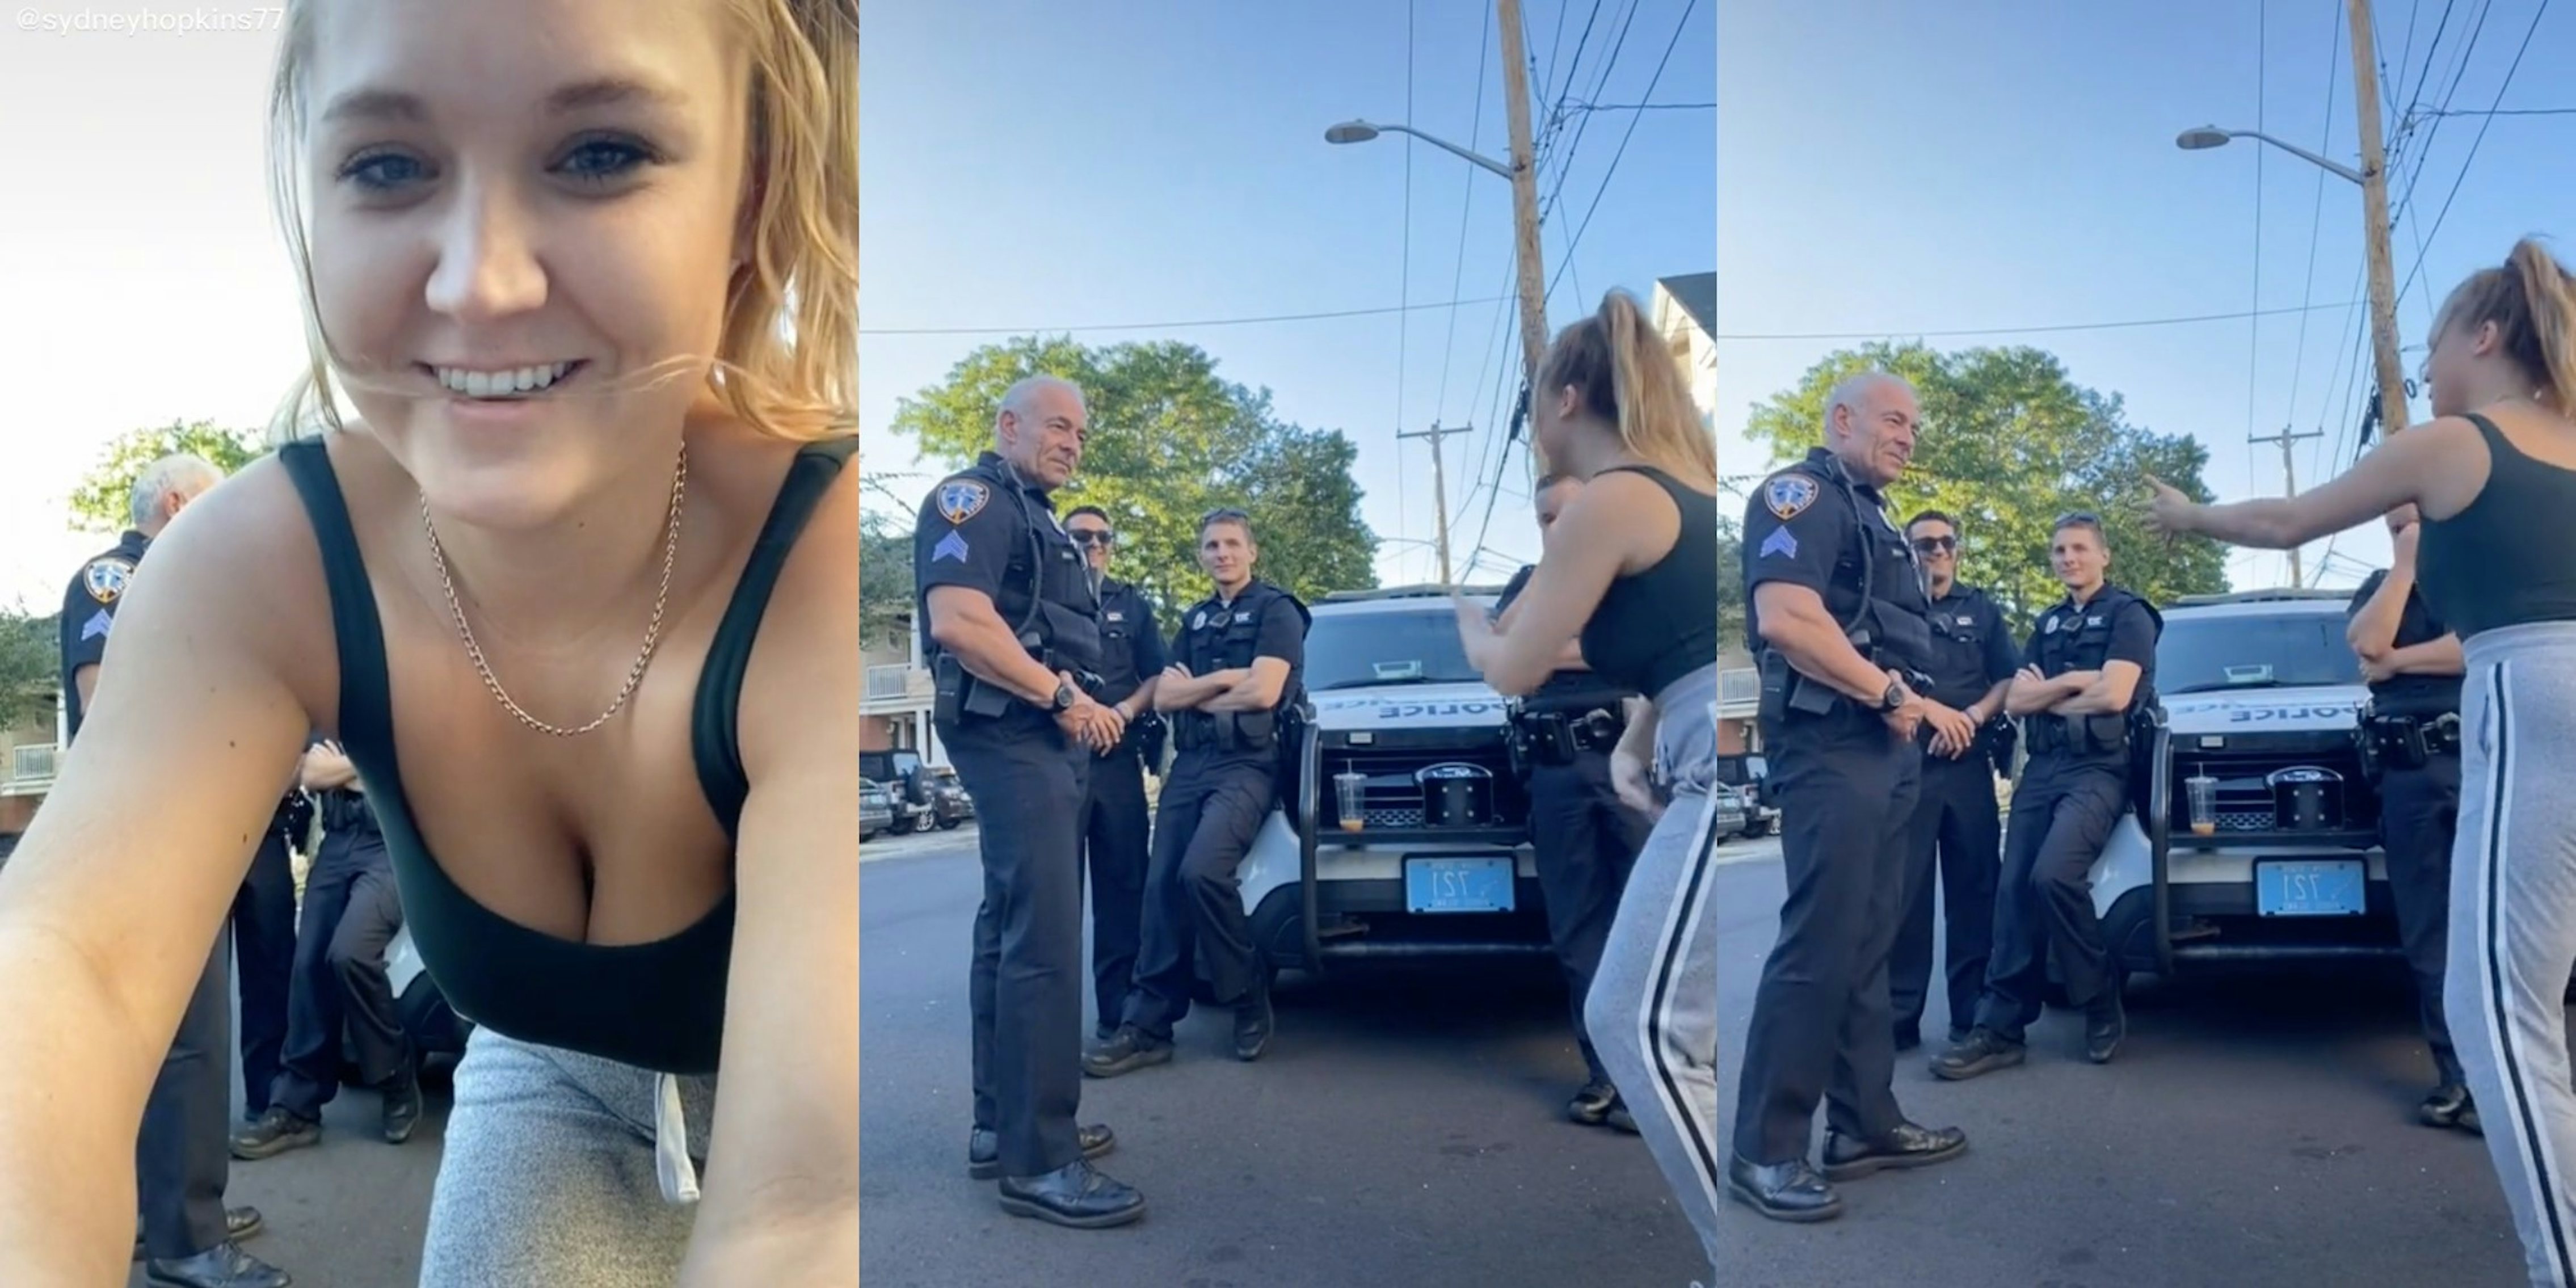 TikToker does 'Rick and Morty' dance for police